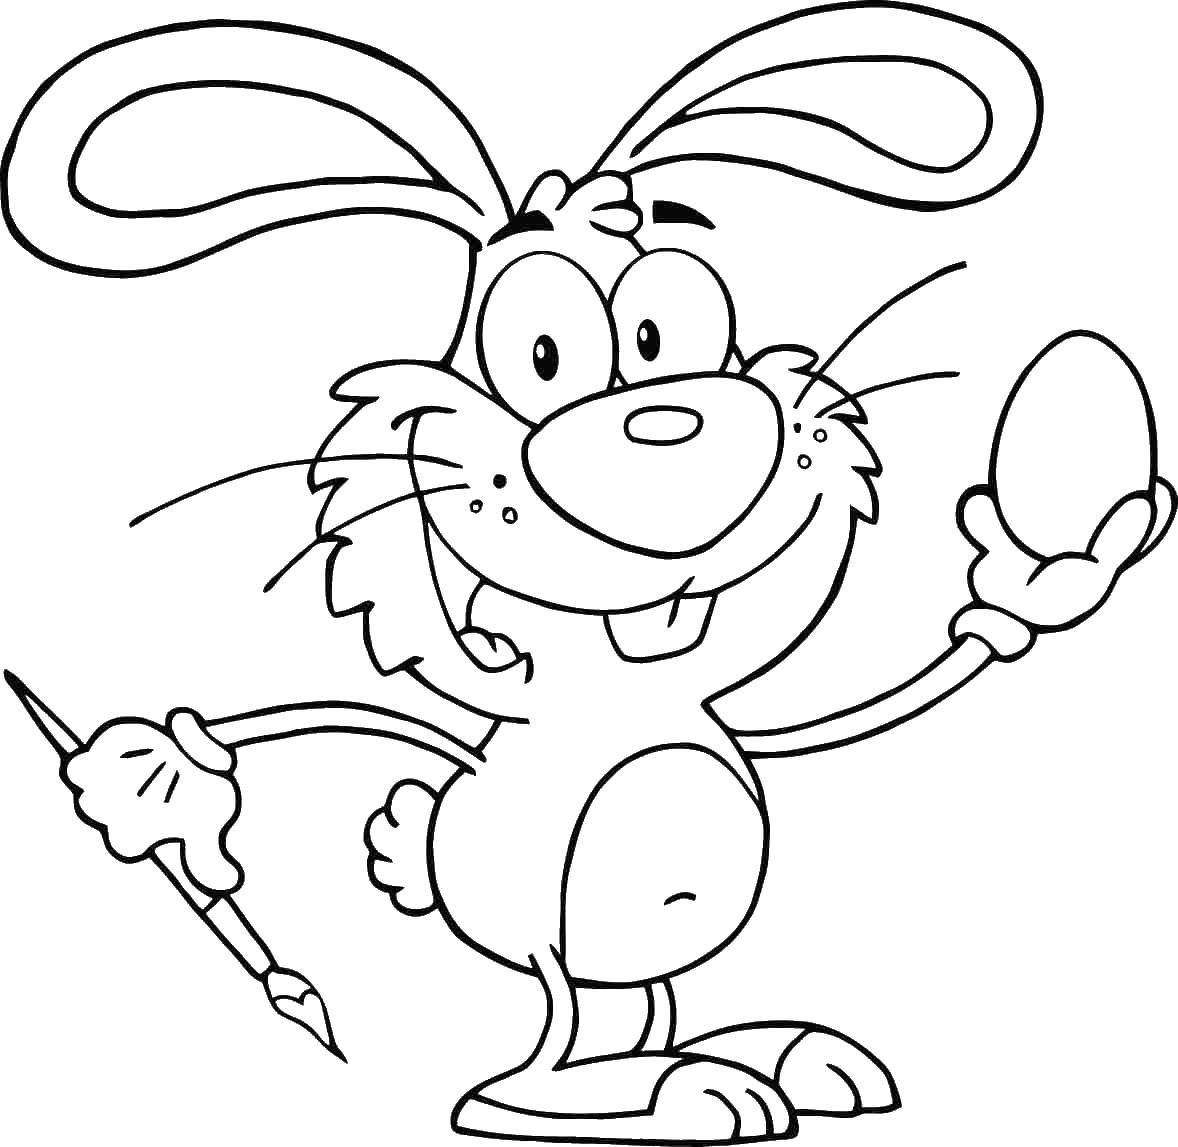 Coloring Rabbit with egg. Category Easter. Tags:  Bunny, rabbit, Easter.